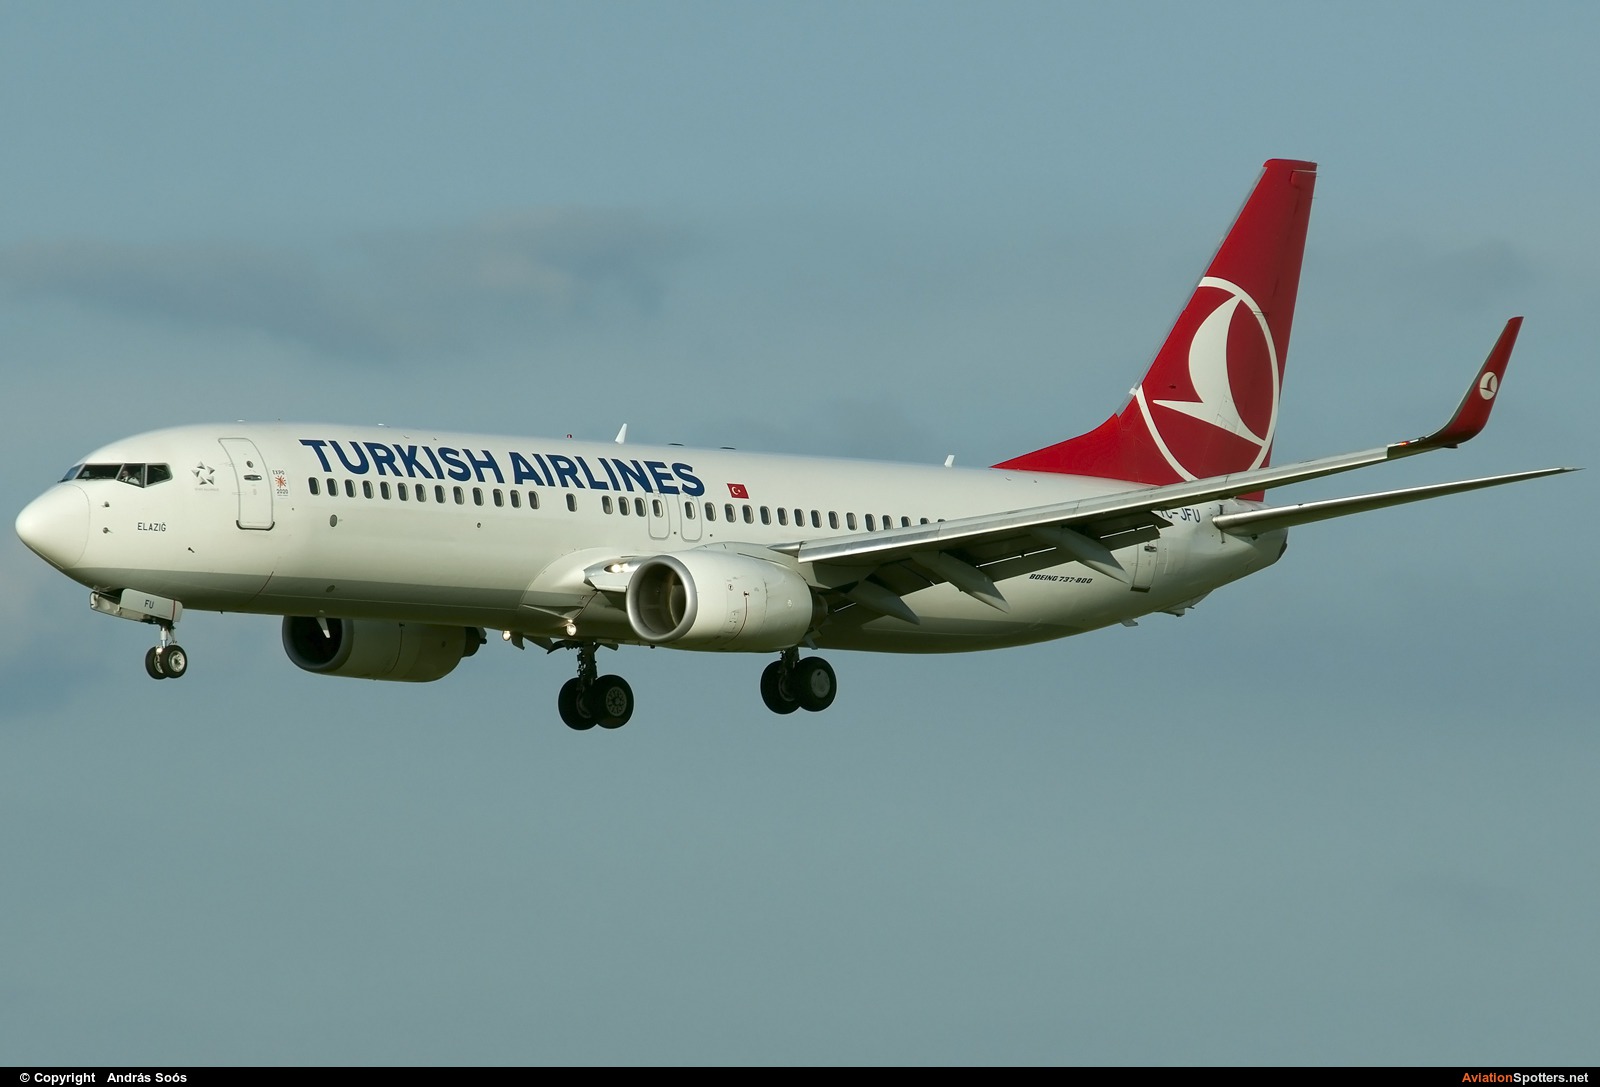 Turkish Airlines  -  737-800  (TC-JFU) By András Soós (sas1965)